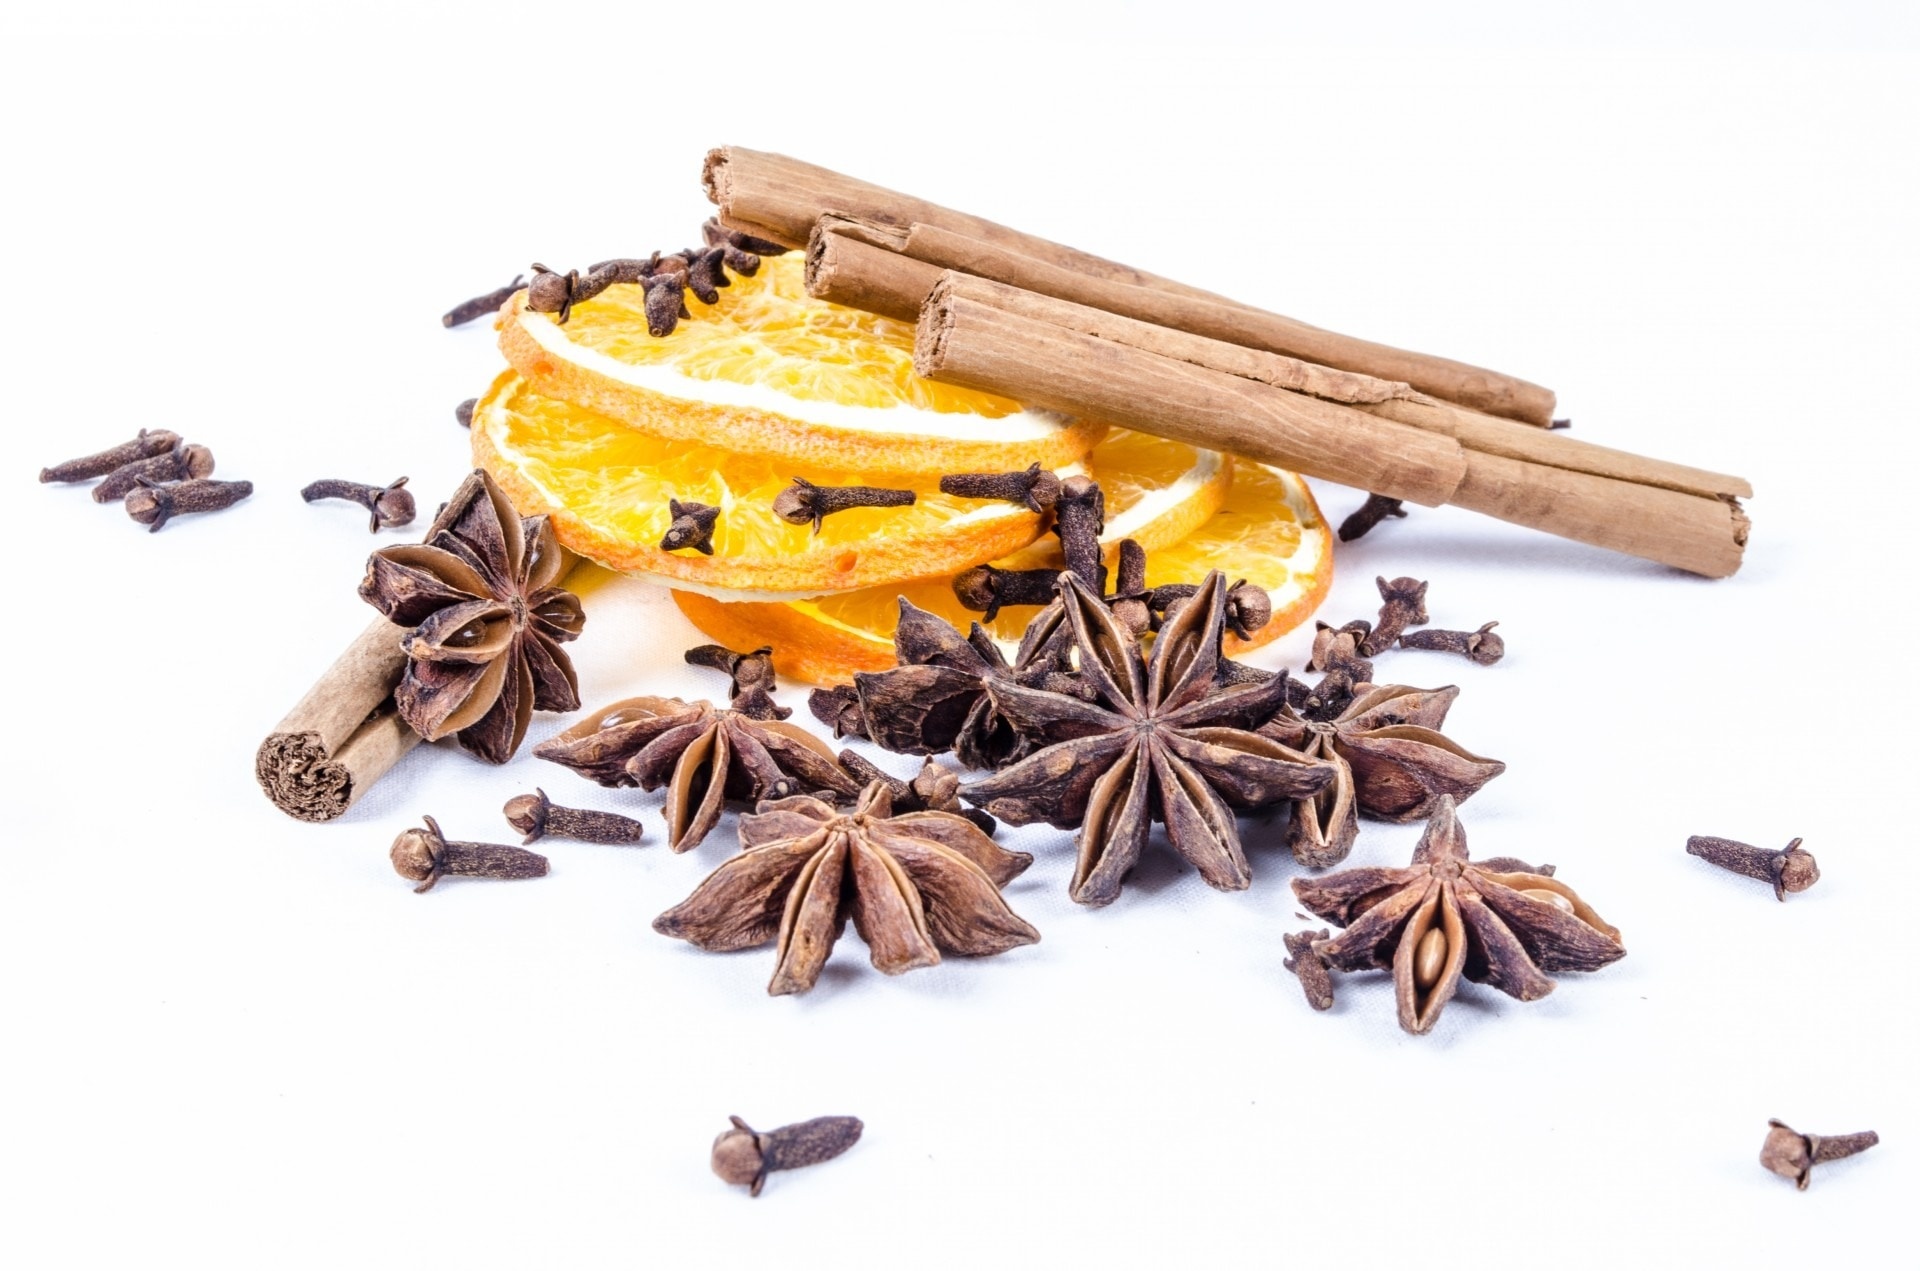 Brown star anise, Earthy spice, Culinary ingredient, Asian flavor, 1920x1280 HD Desktop